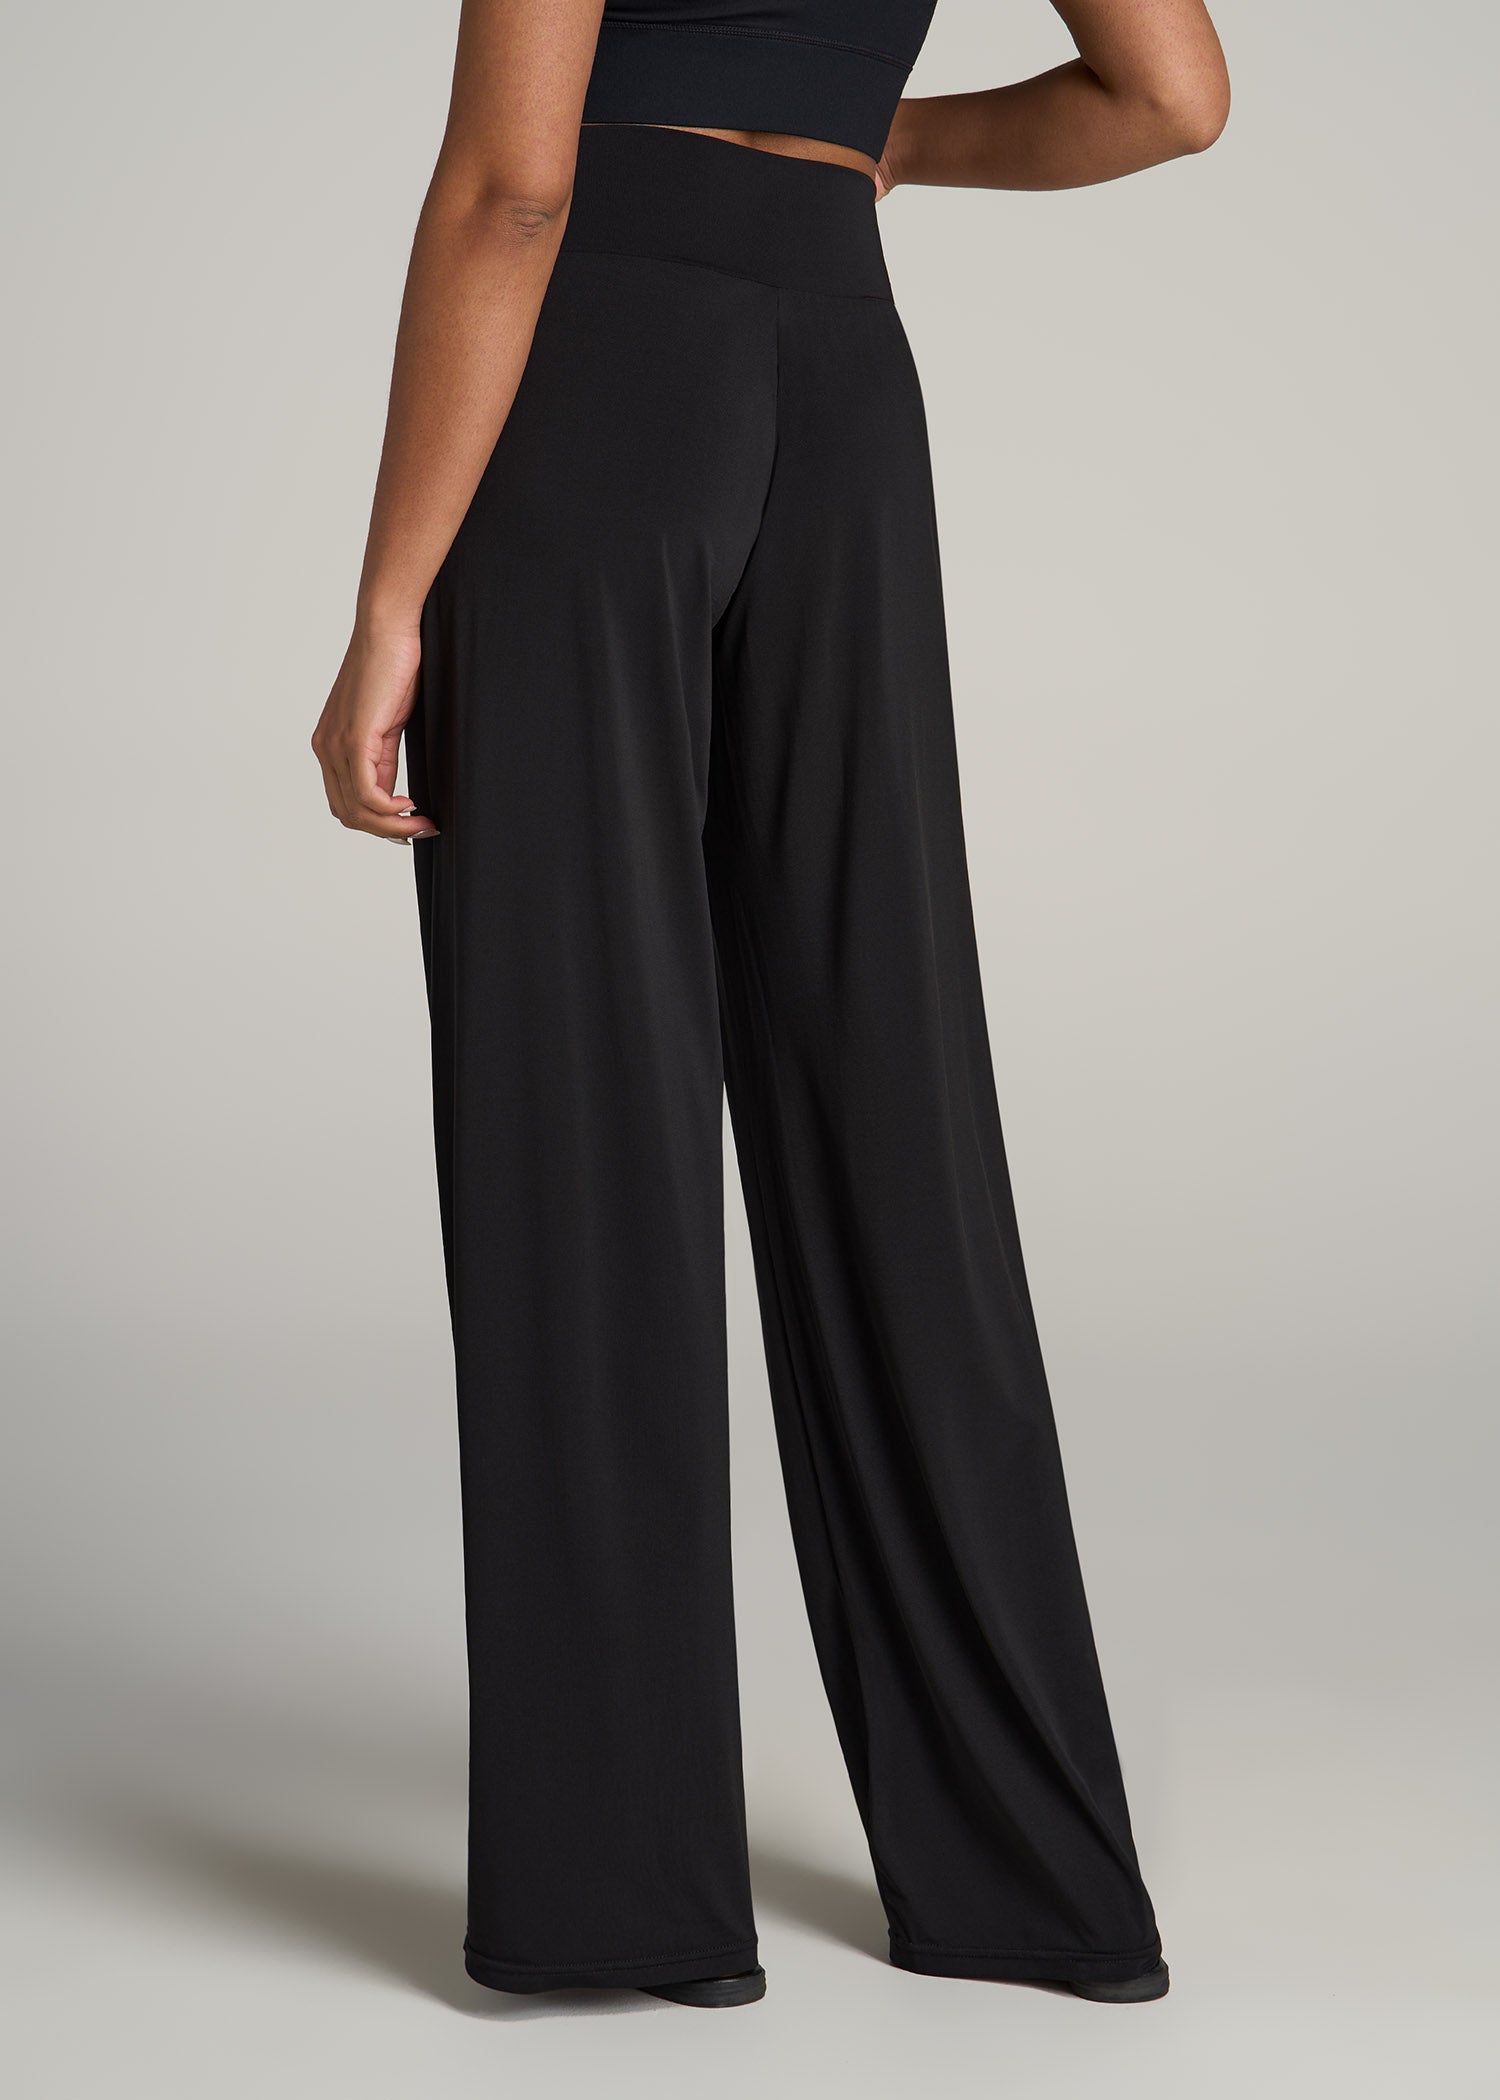 Pull On Breezy Wide Leg Pants for Tall Women | American Tall